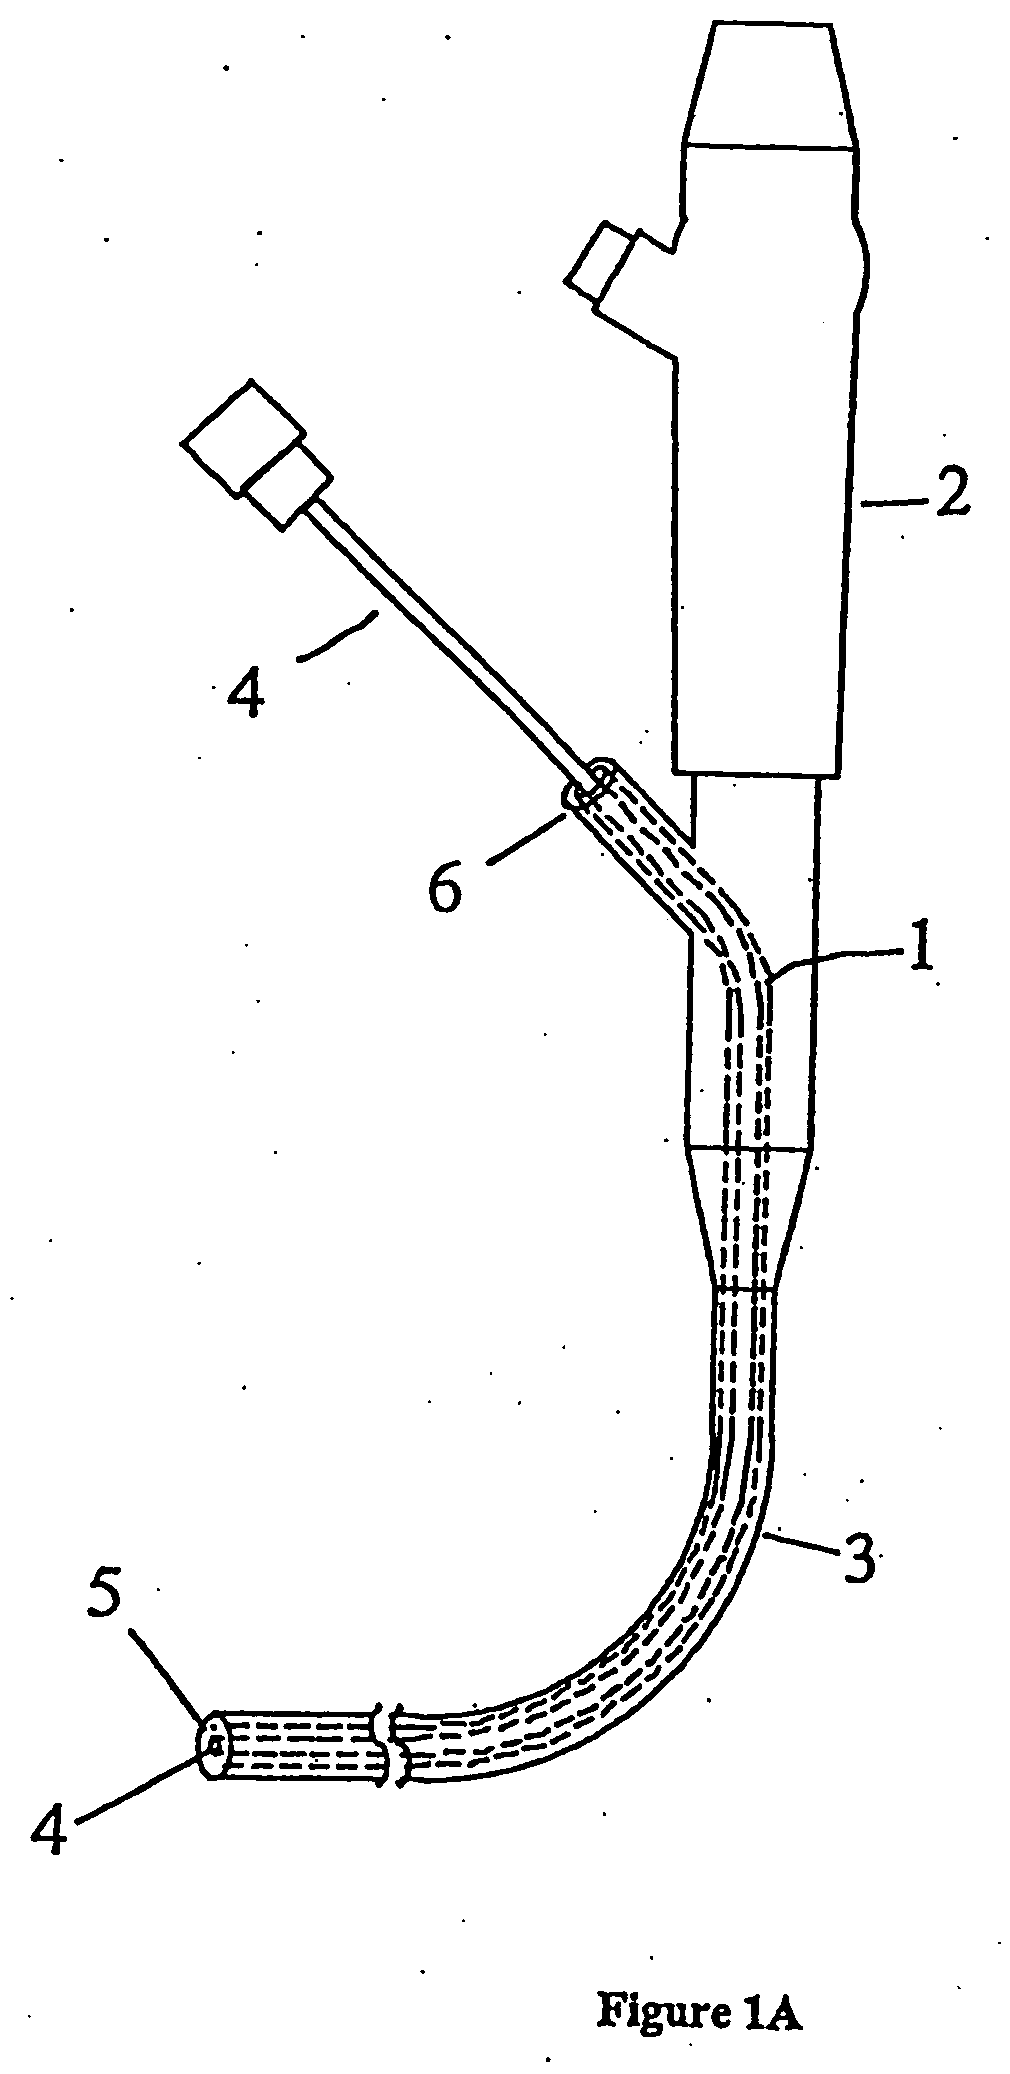 System and method for controlling force applied to and manipulation of medical instruments